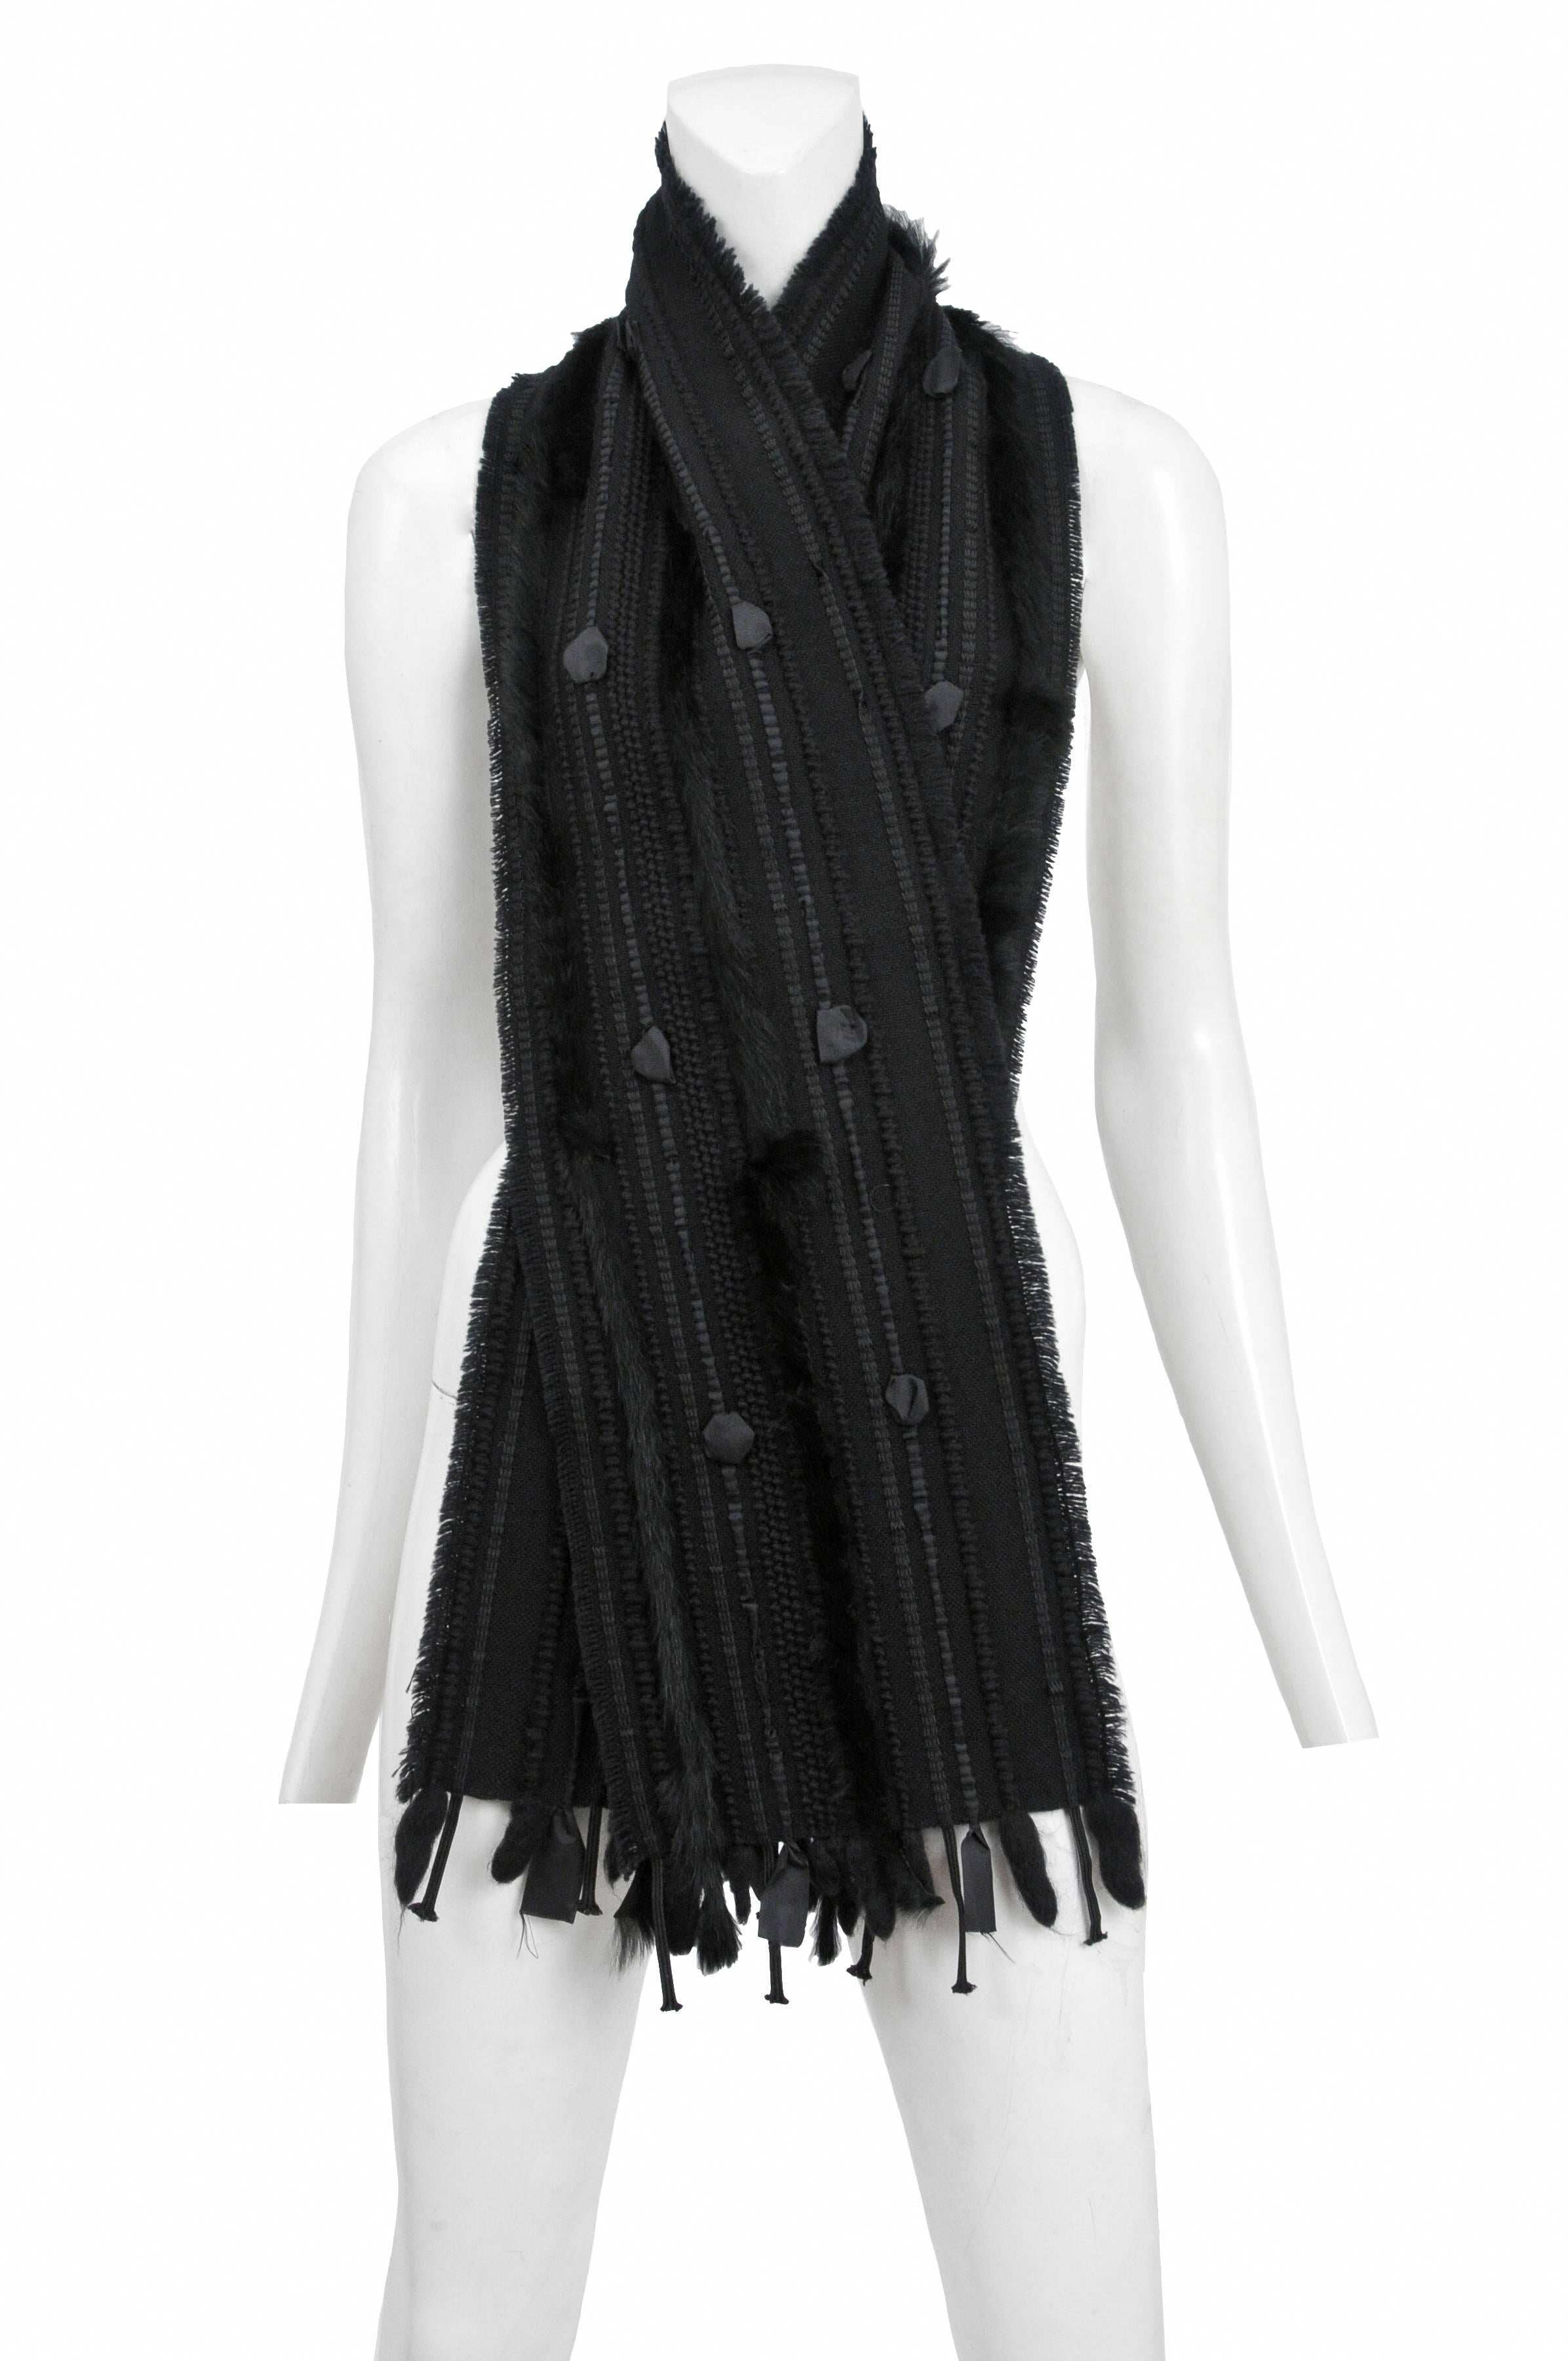 Vintage Tom Ford for Gucci black woven and fur scarf with feathers. Circa 2002.
Please inquire for additional images.